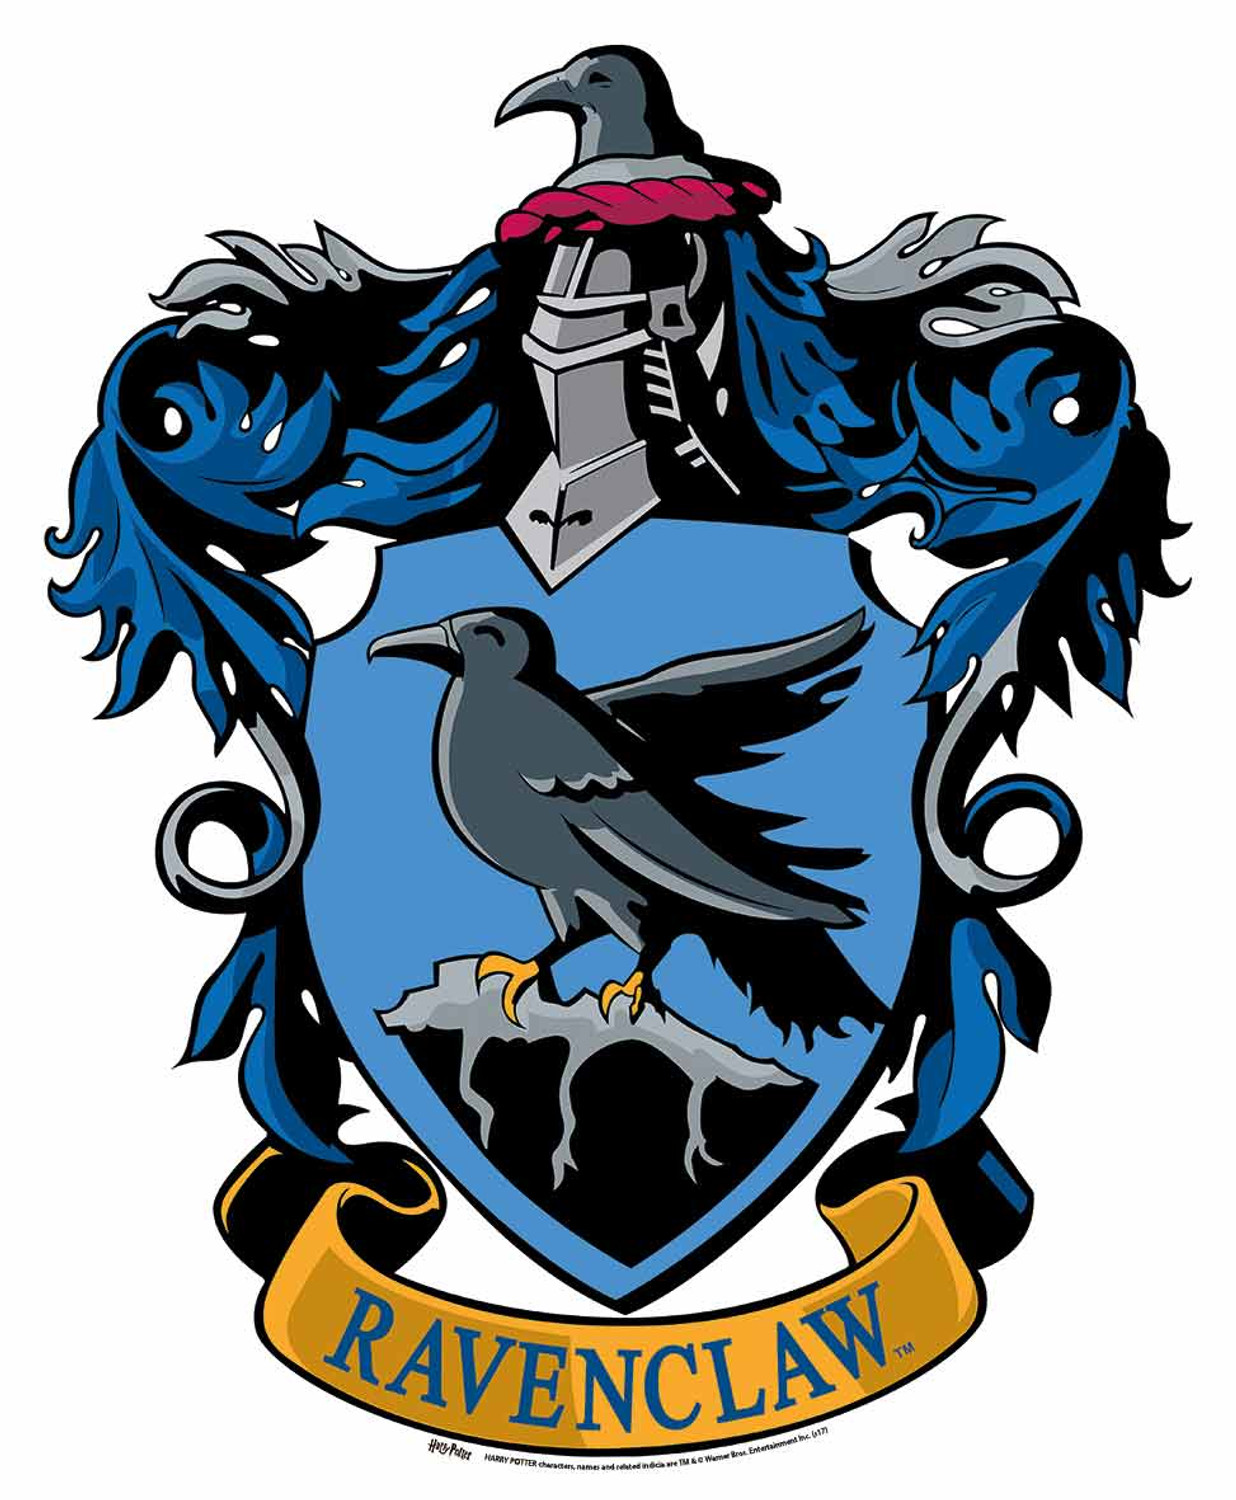 Ravenclaw Crest Wall Art at